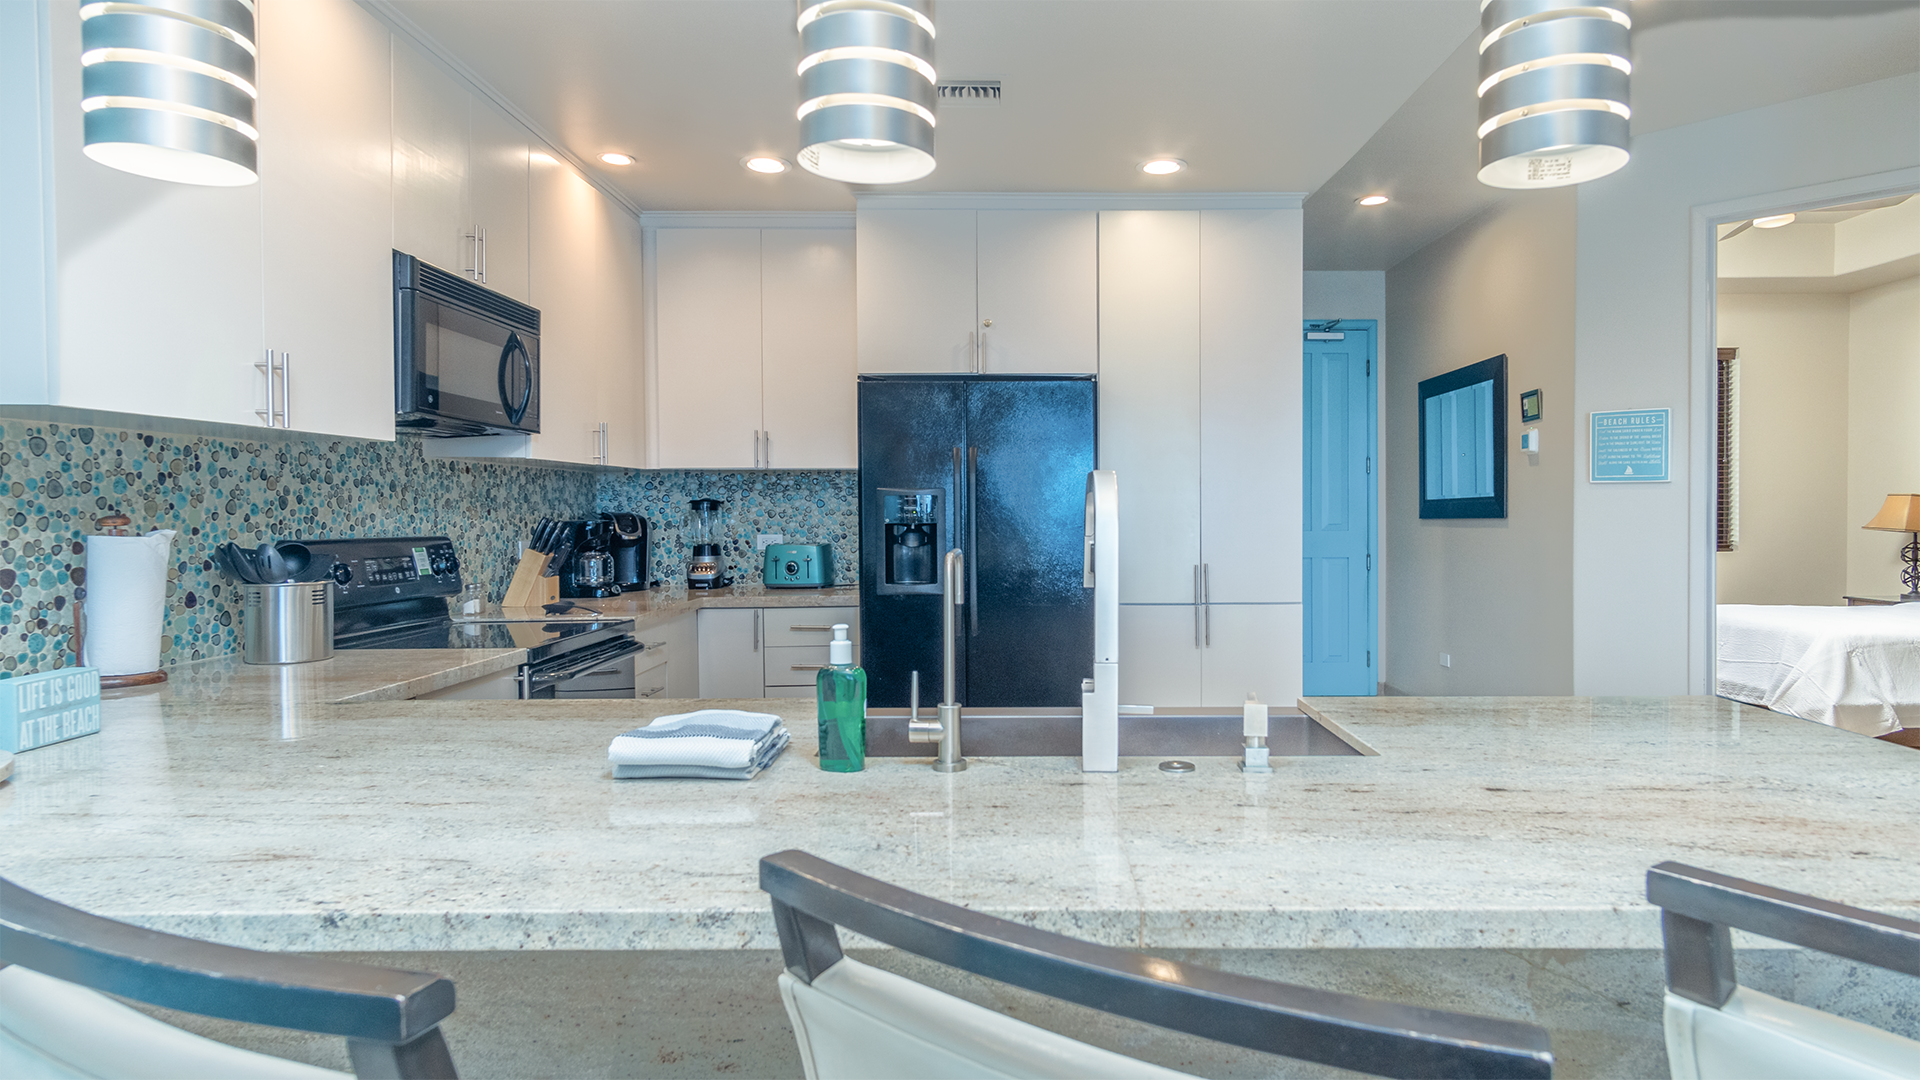 the kitchen counter has custom lighting, and raised seating